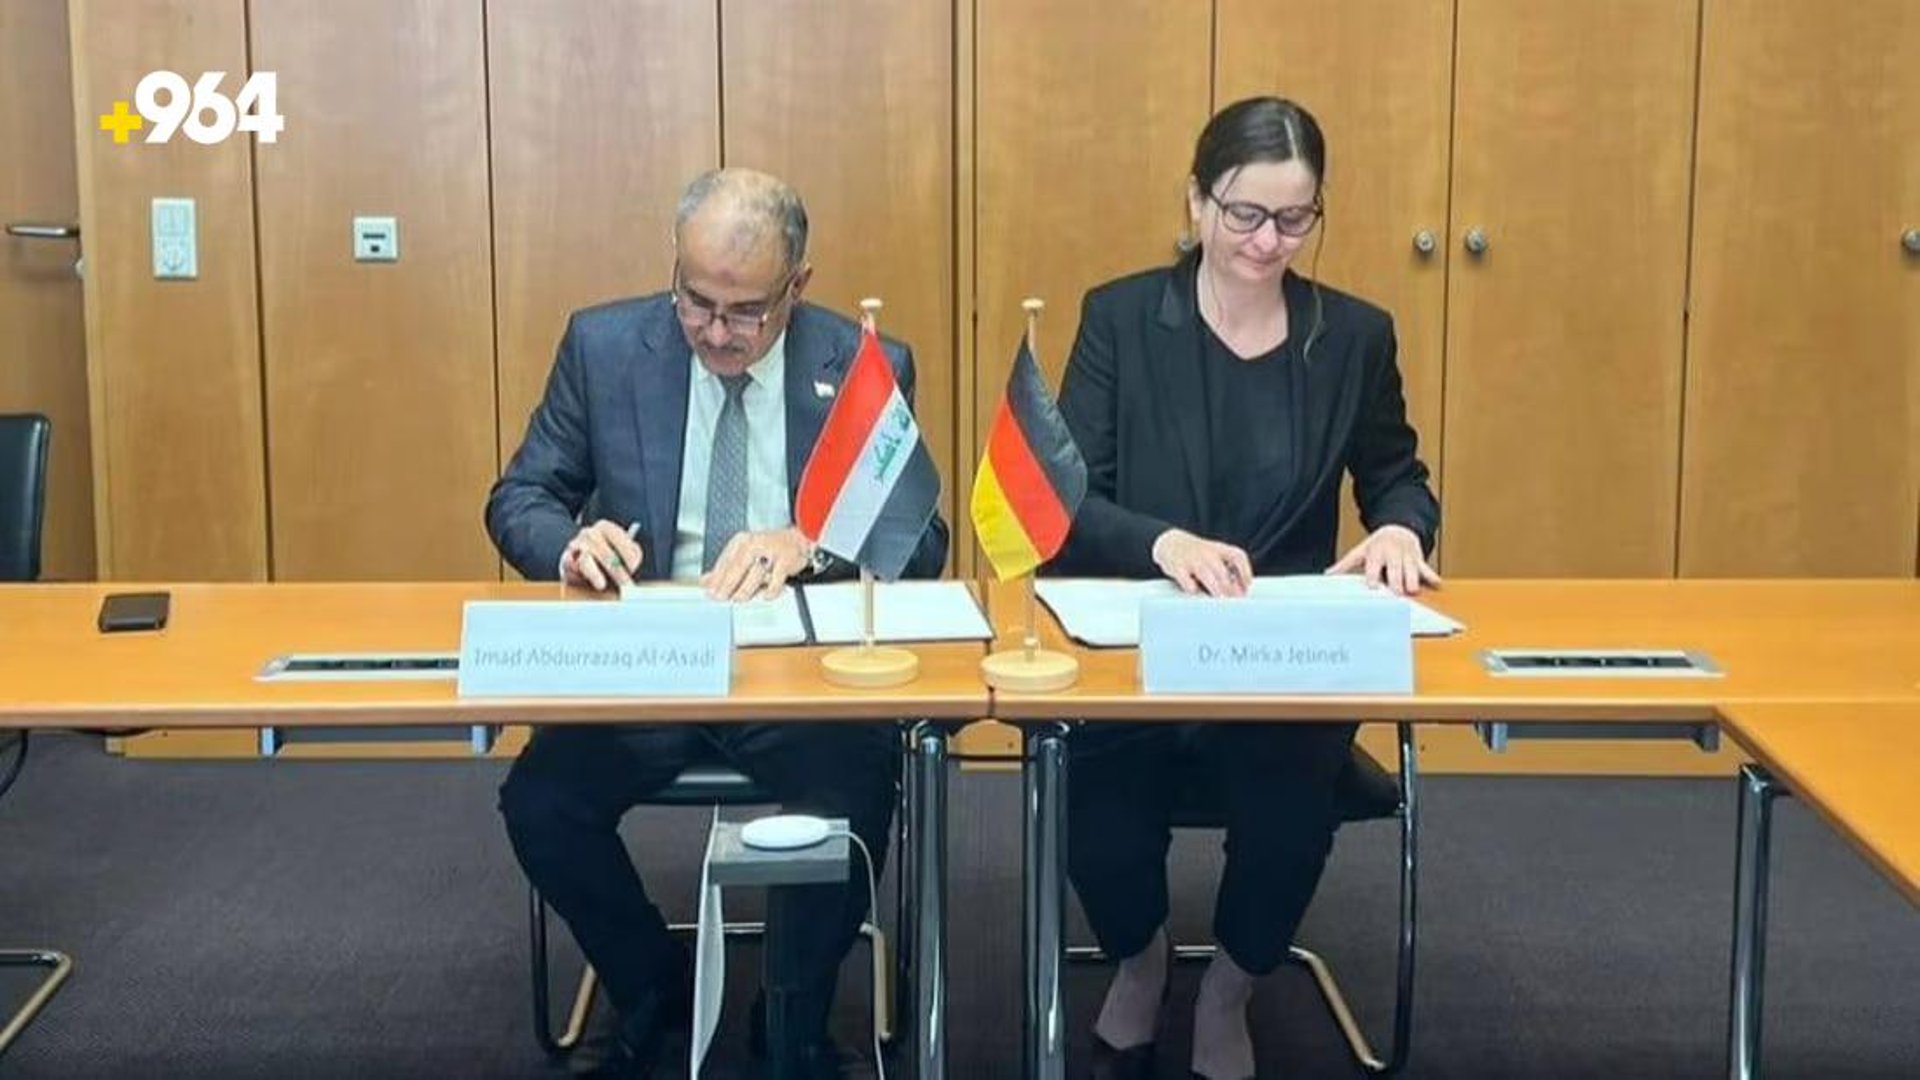 Iraqi civil aviation authority to strengthen ties with Germany